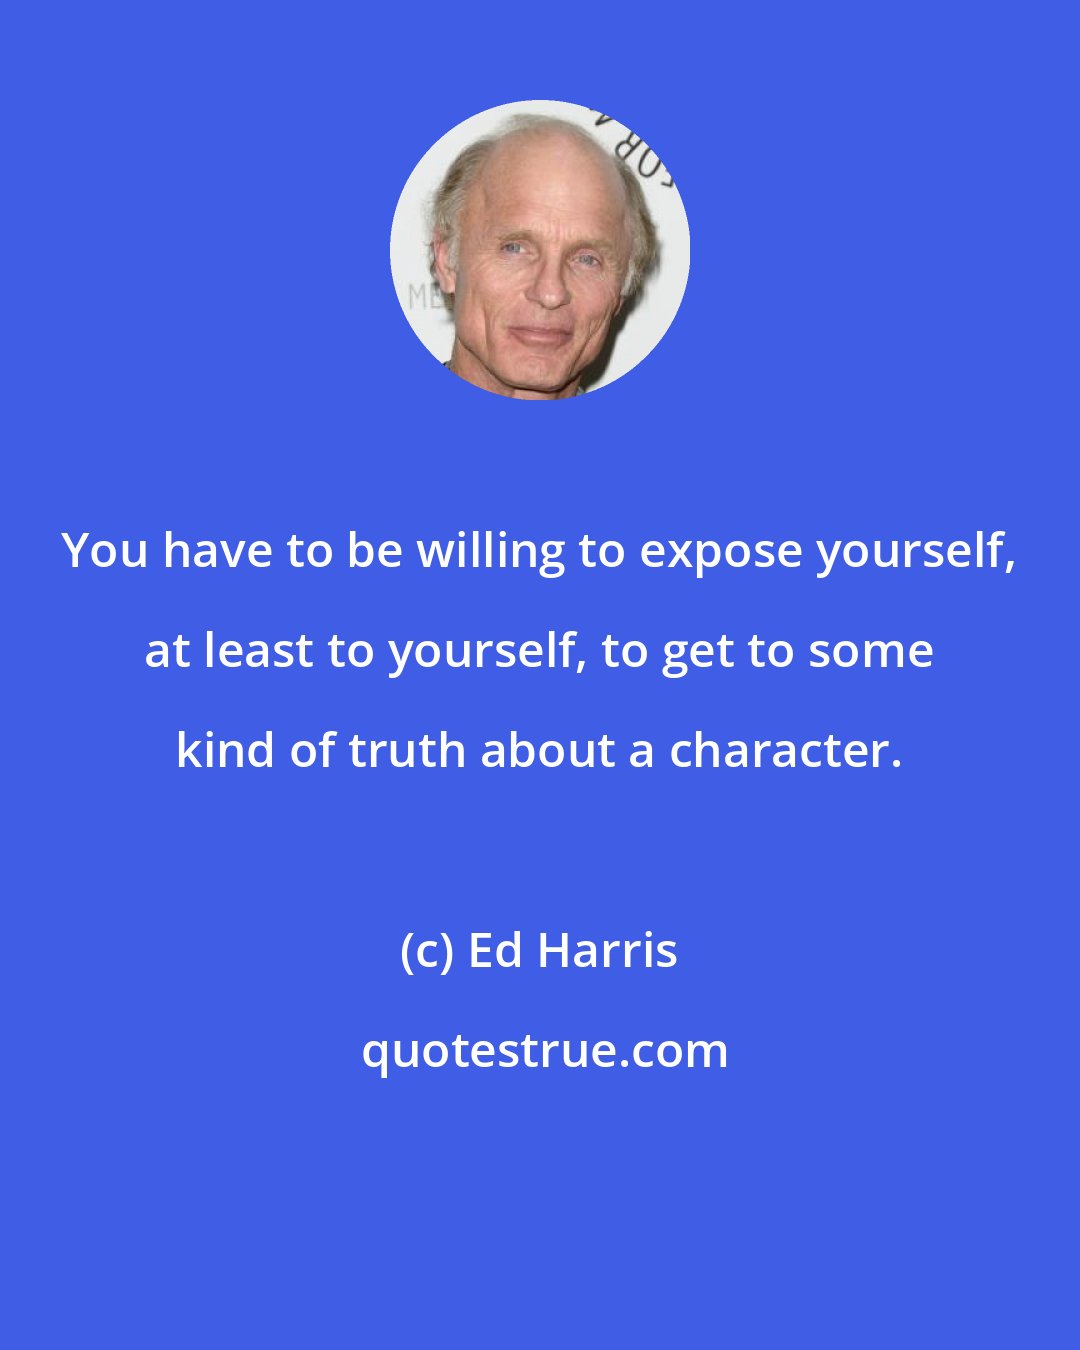 Ed Harris: You have to be willing to expose yourself, at least to yourself, to get to some kind of truth about a character.